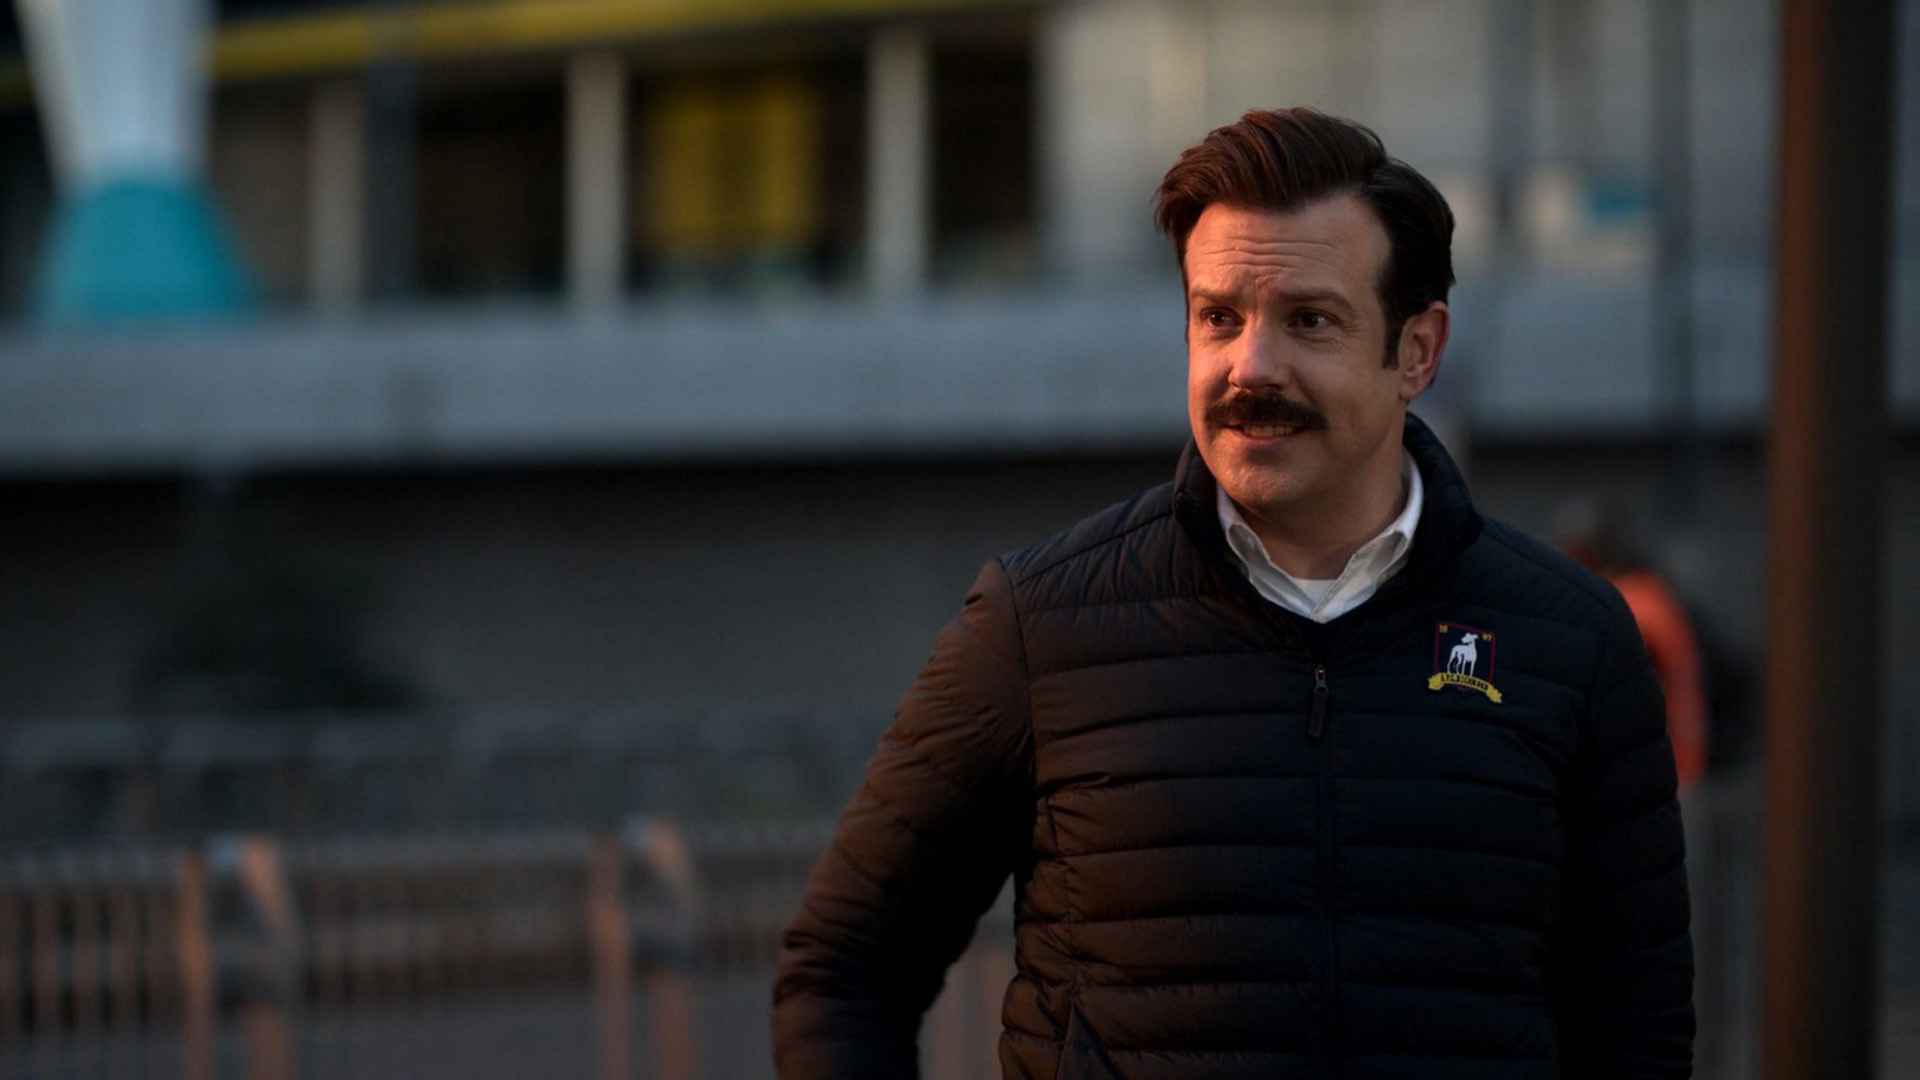 A Rough Start for Nate: Ted Lasso Season 3 Premiere Delves into His Humiliation